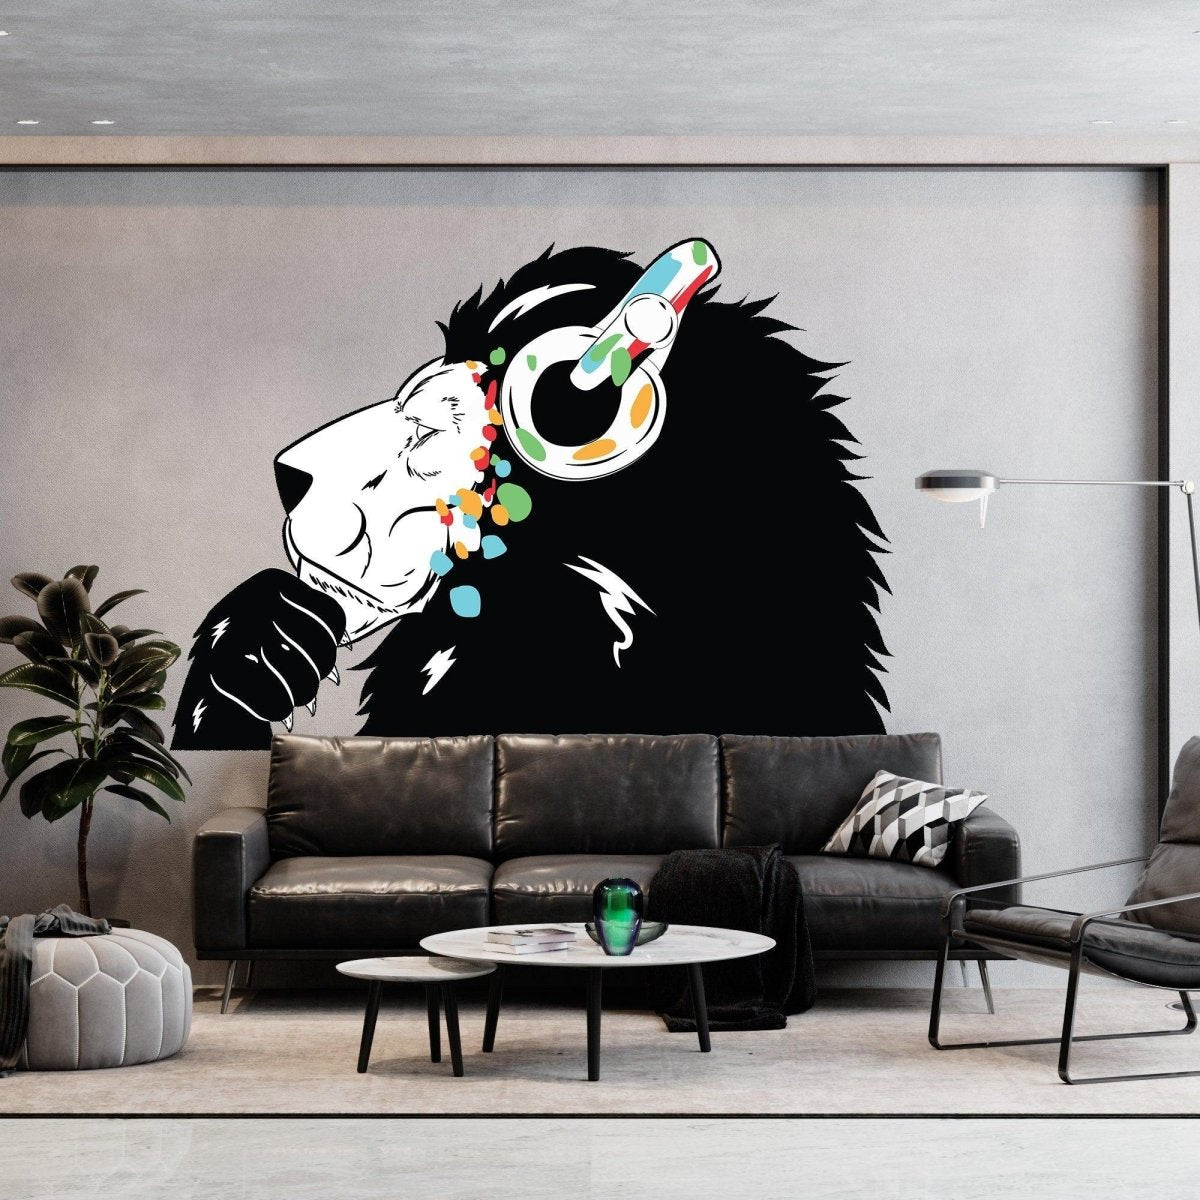 Lion Theme Wall Stickers, Groove Decals for Kids, Animal Escape Artwork -  24 x 16 / Left side (Original)